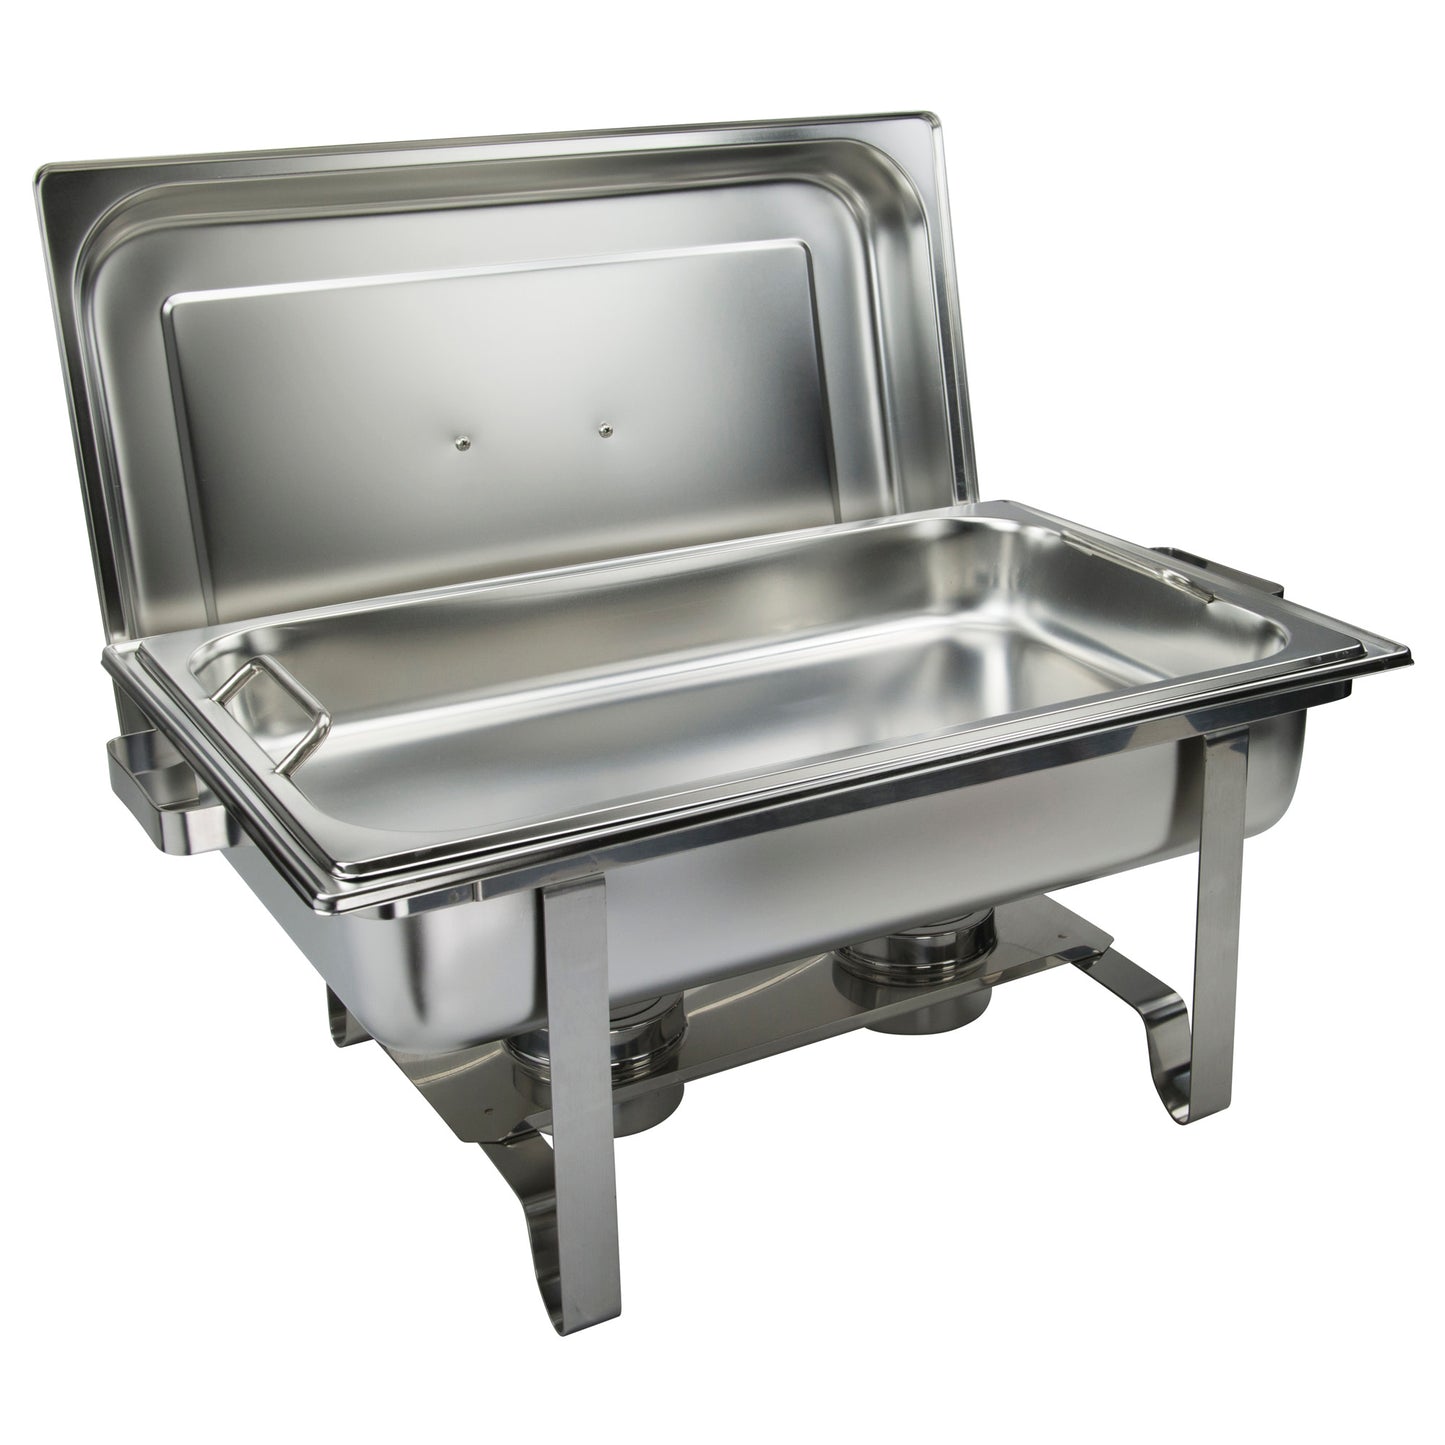 C-2080B - Get-A-Grip 8 Quart Full-Size Chafer, Stainless Steel